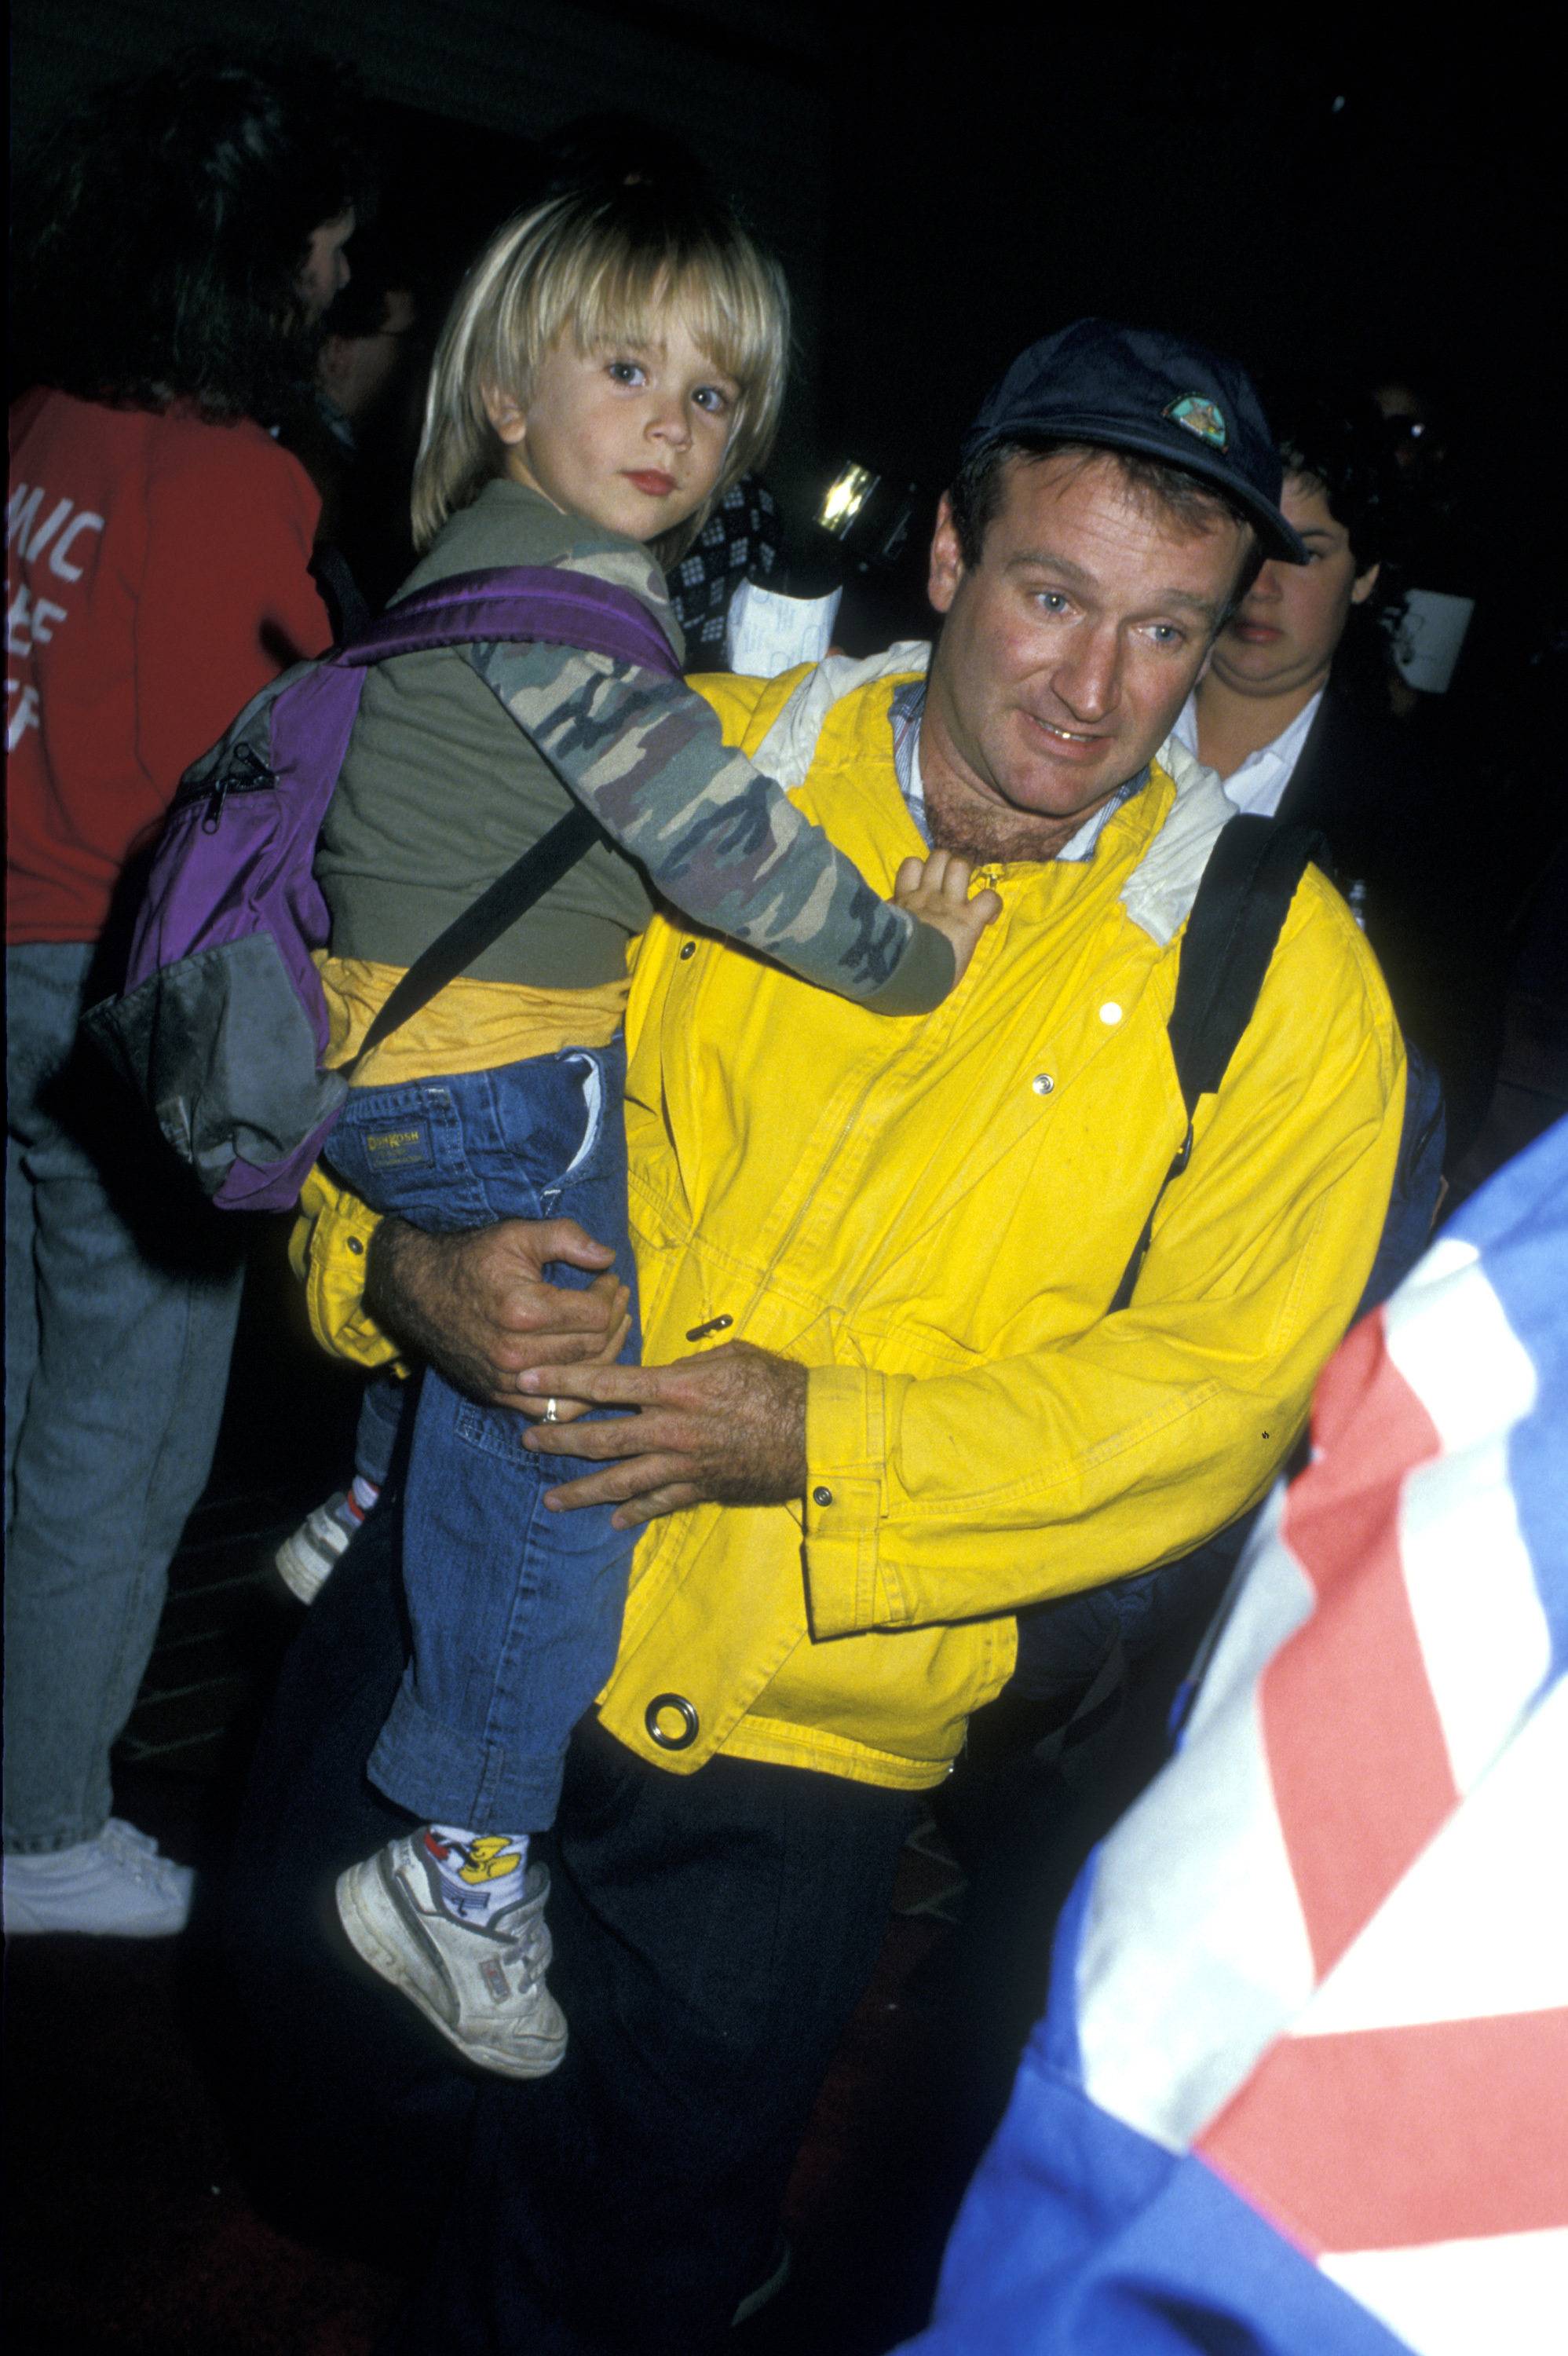 Zachary Williams et Robin Williams vers 1987. | Source : Getty Images